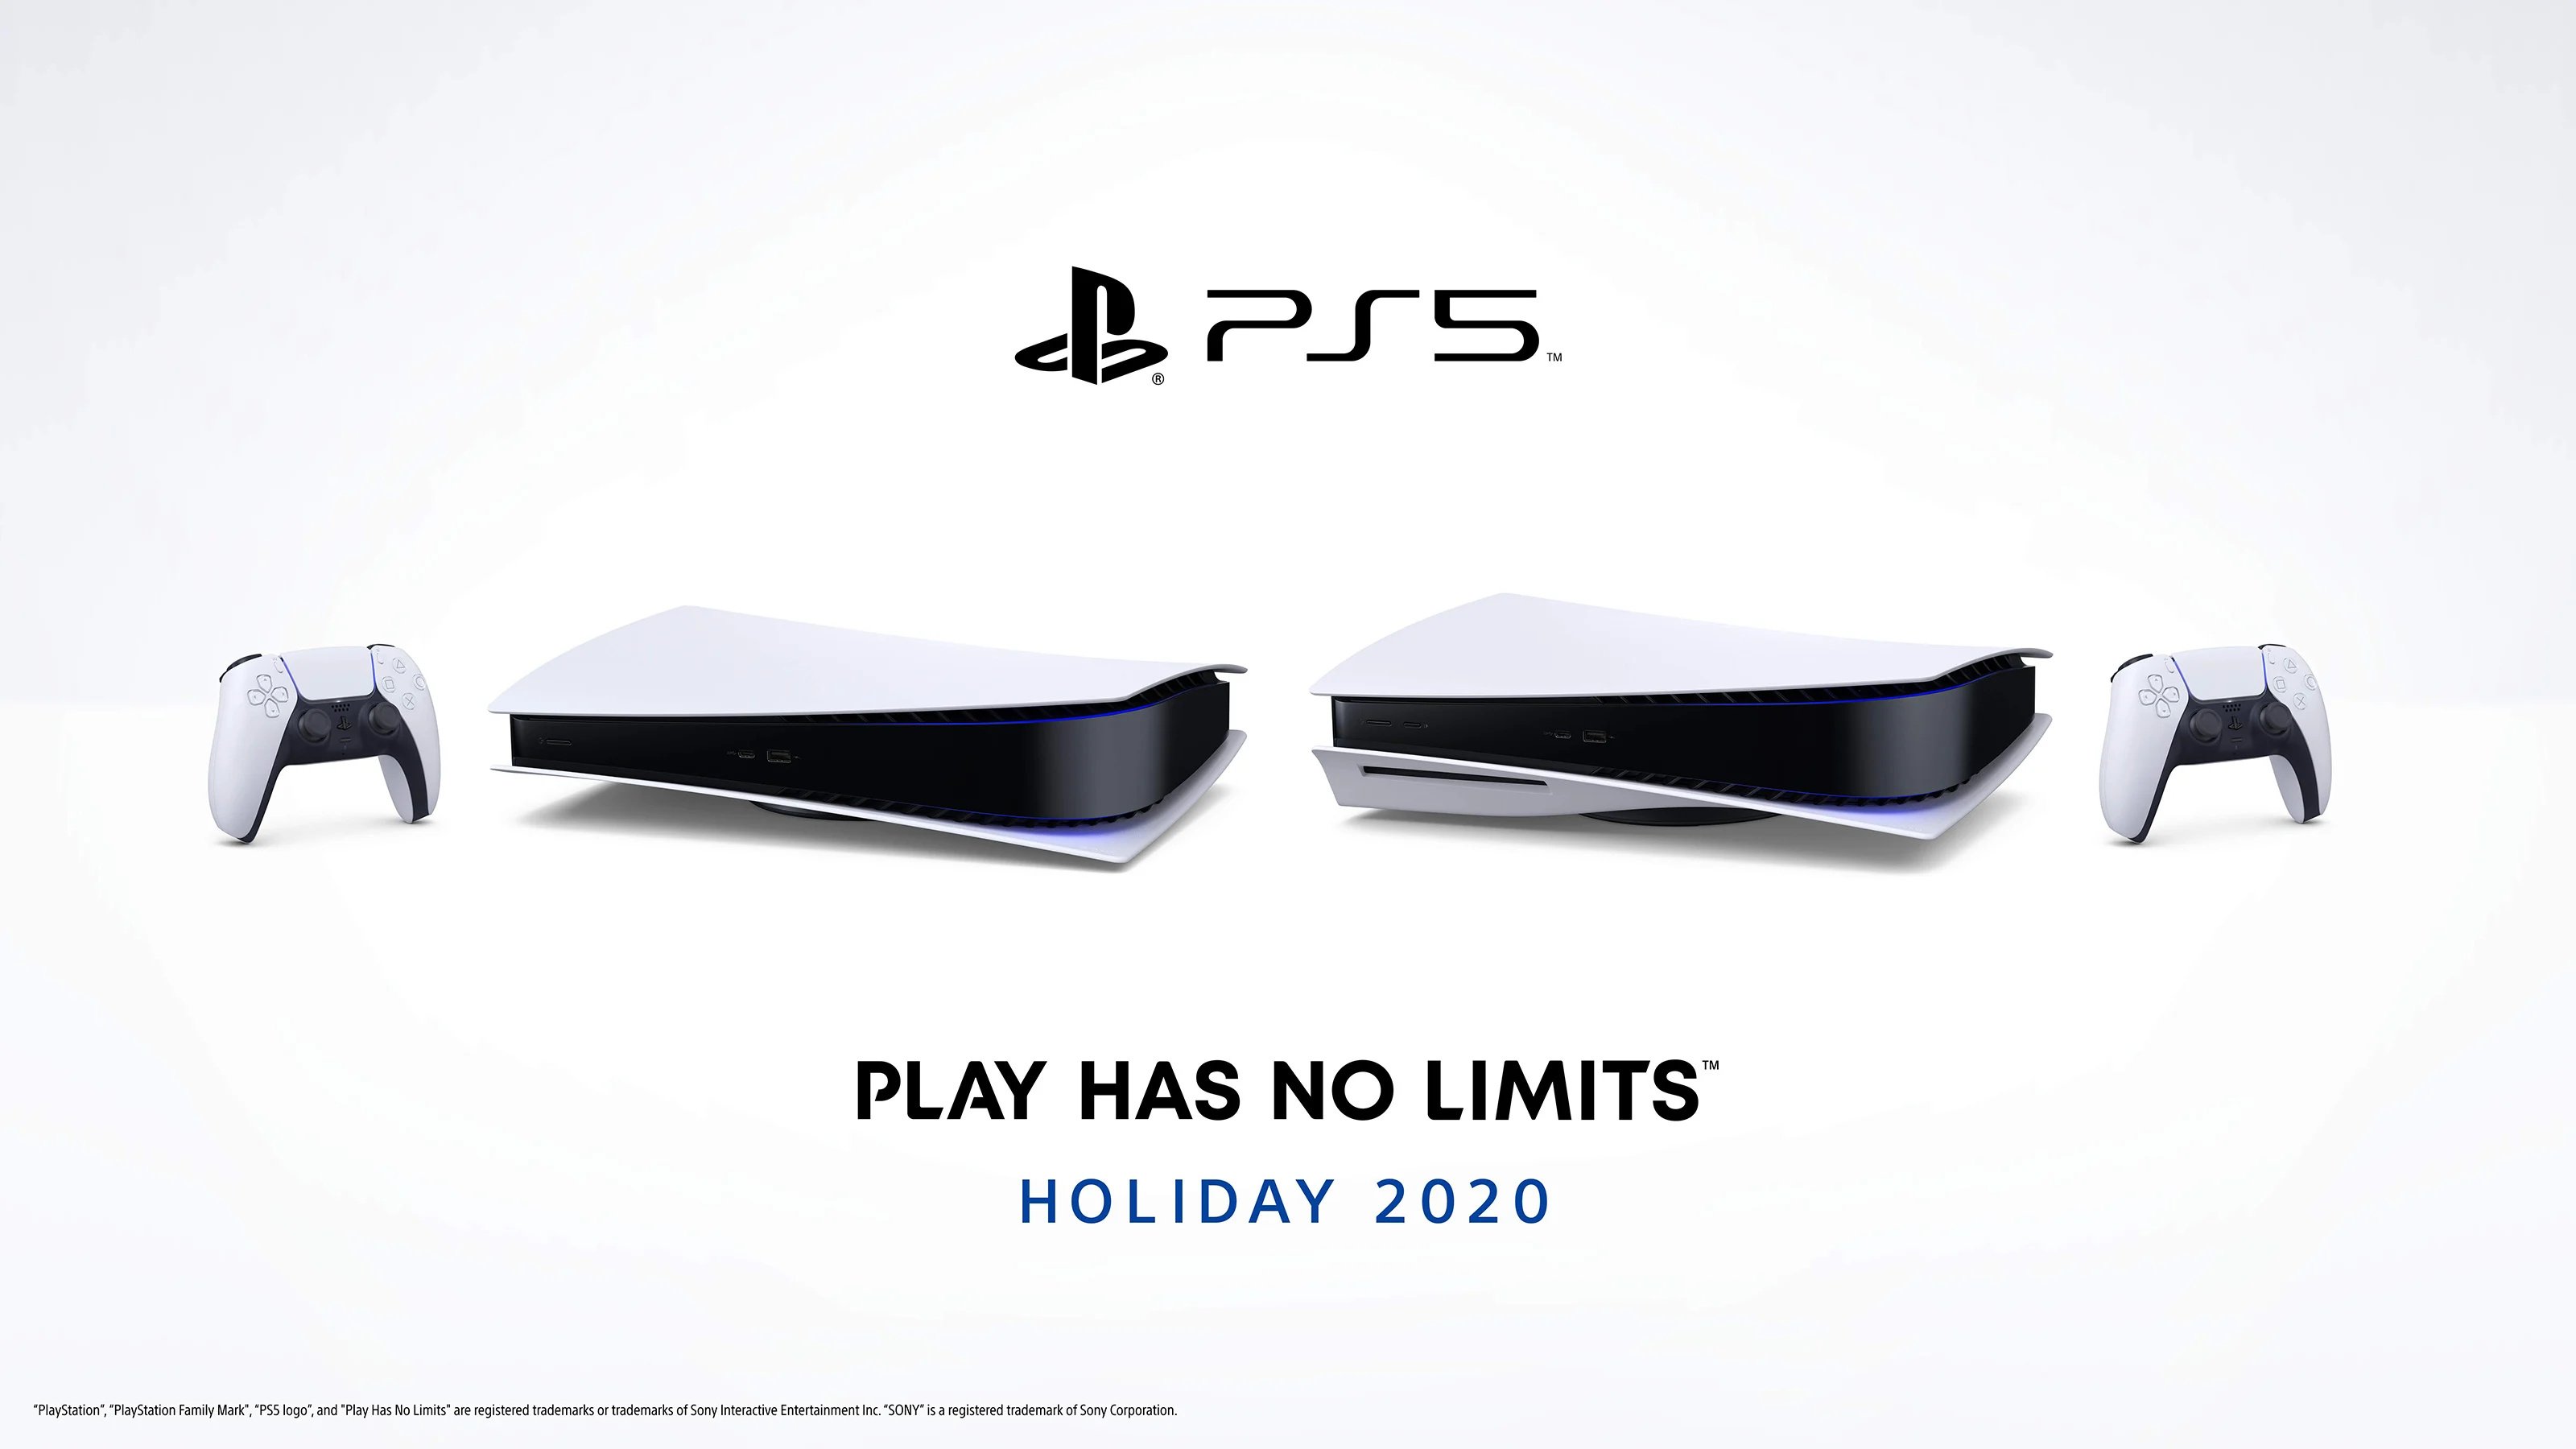 ps5 price in pounds